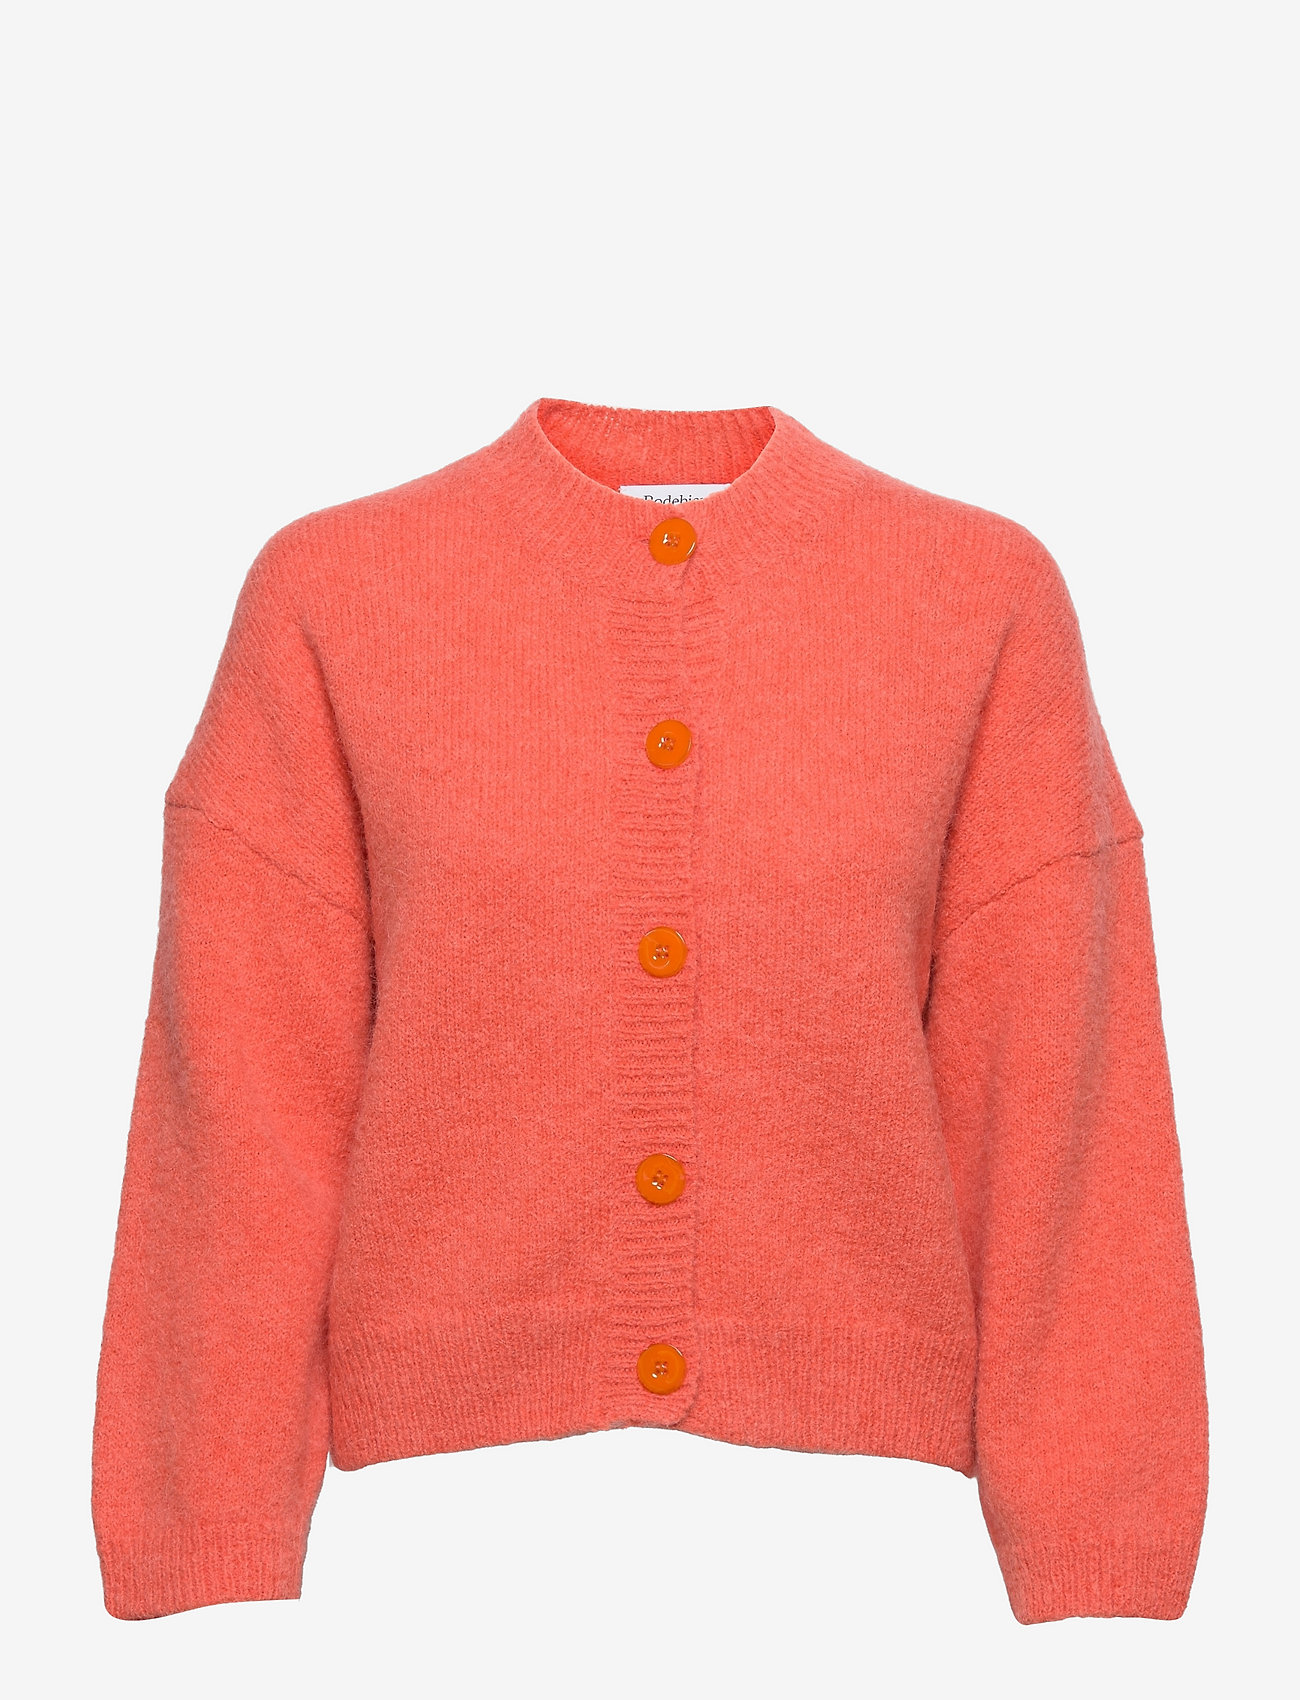 RODEBJER - RODEBJER ALDONZA - cardigans - coral crush - 0